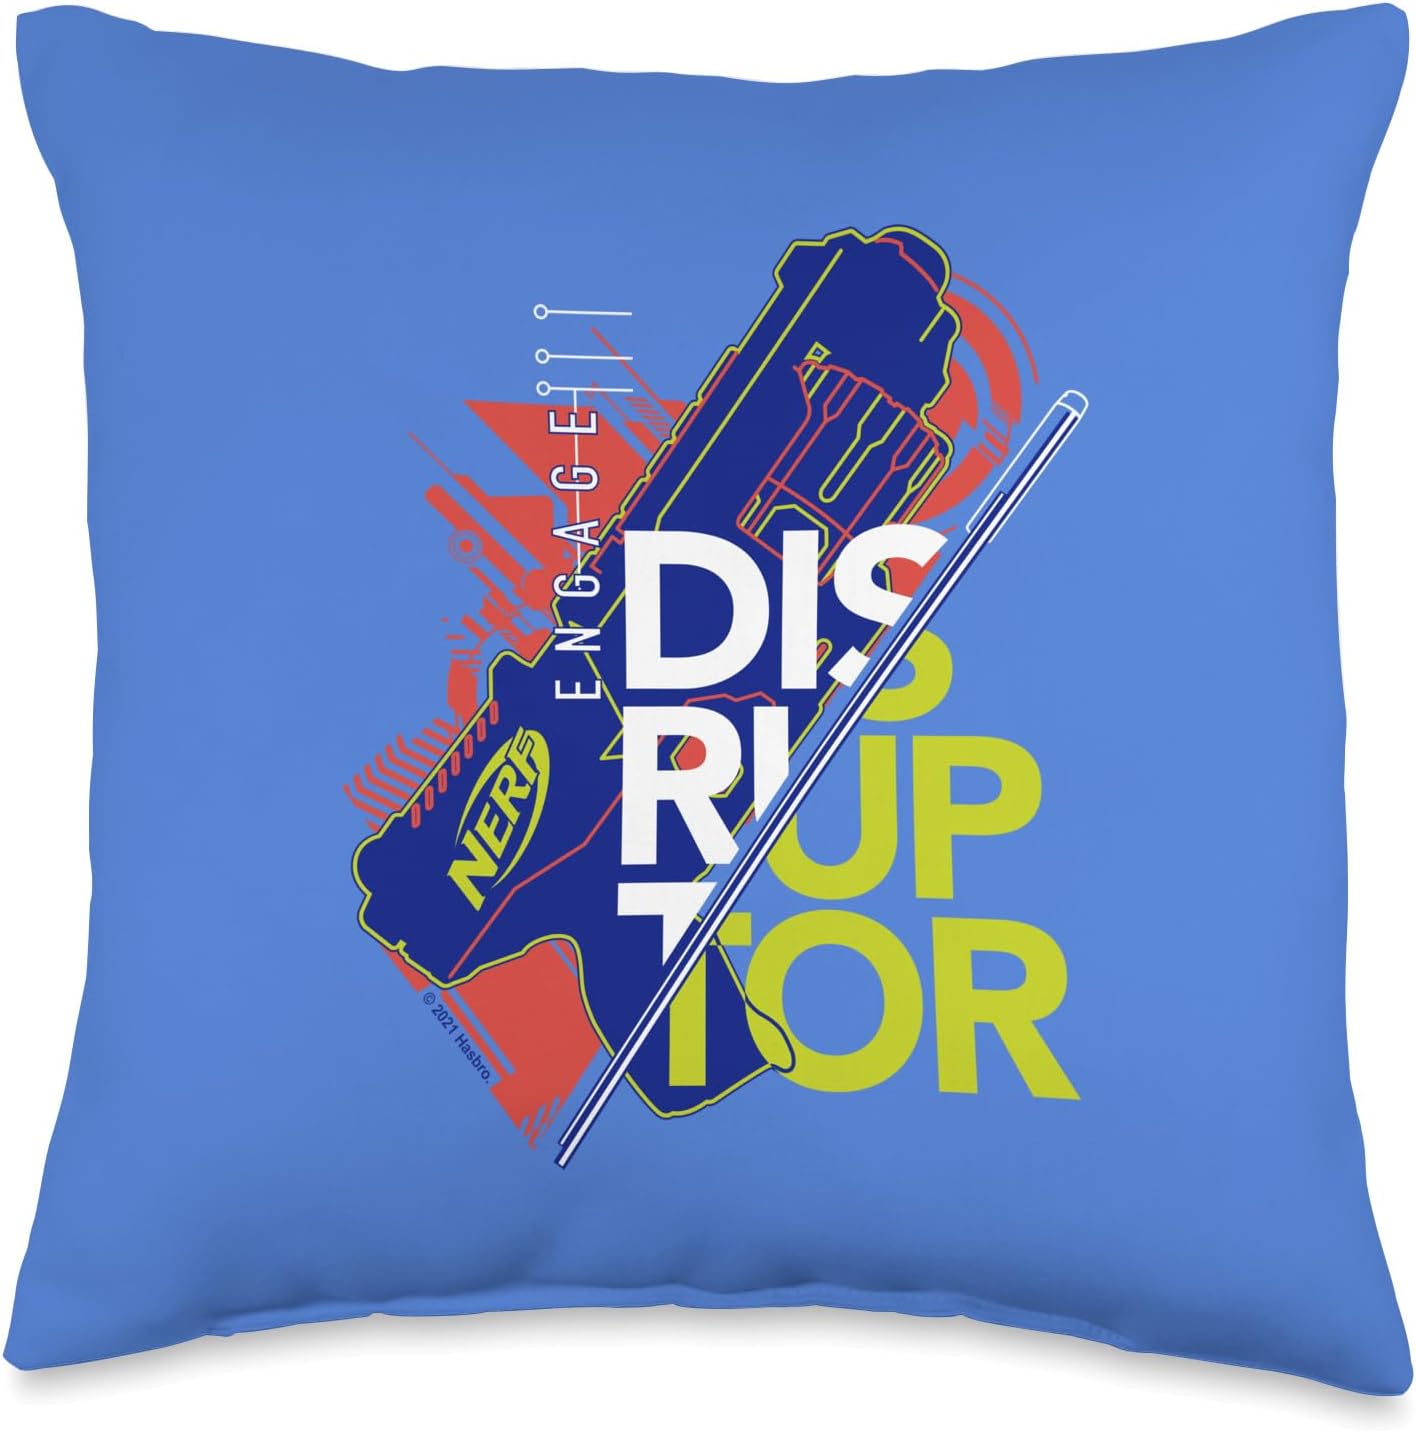 Nerf Engage The Disruptor Throw Pillow, 16x16, Multicolor